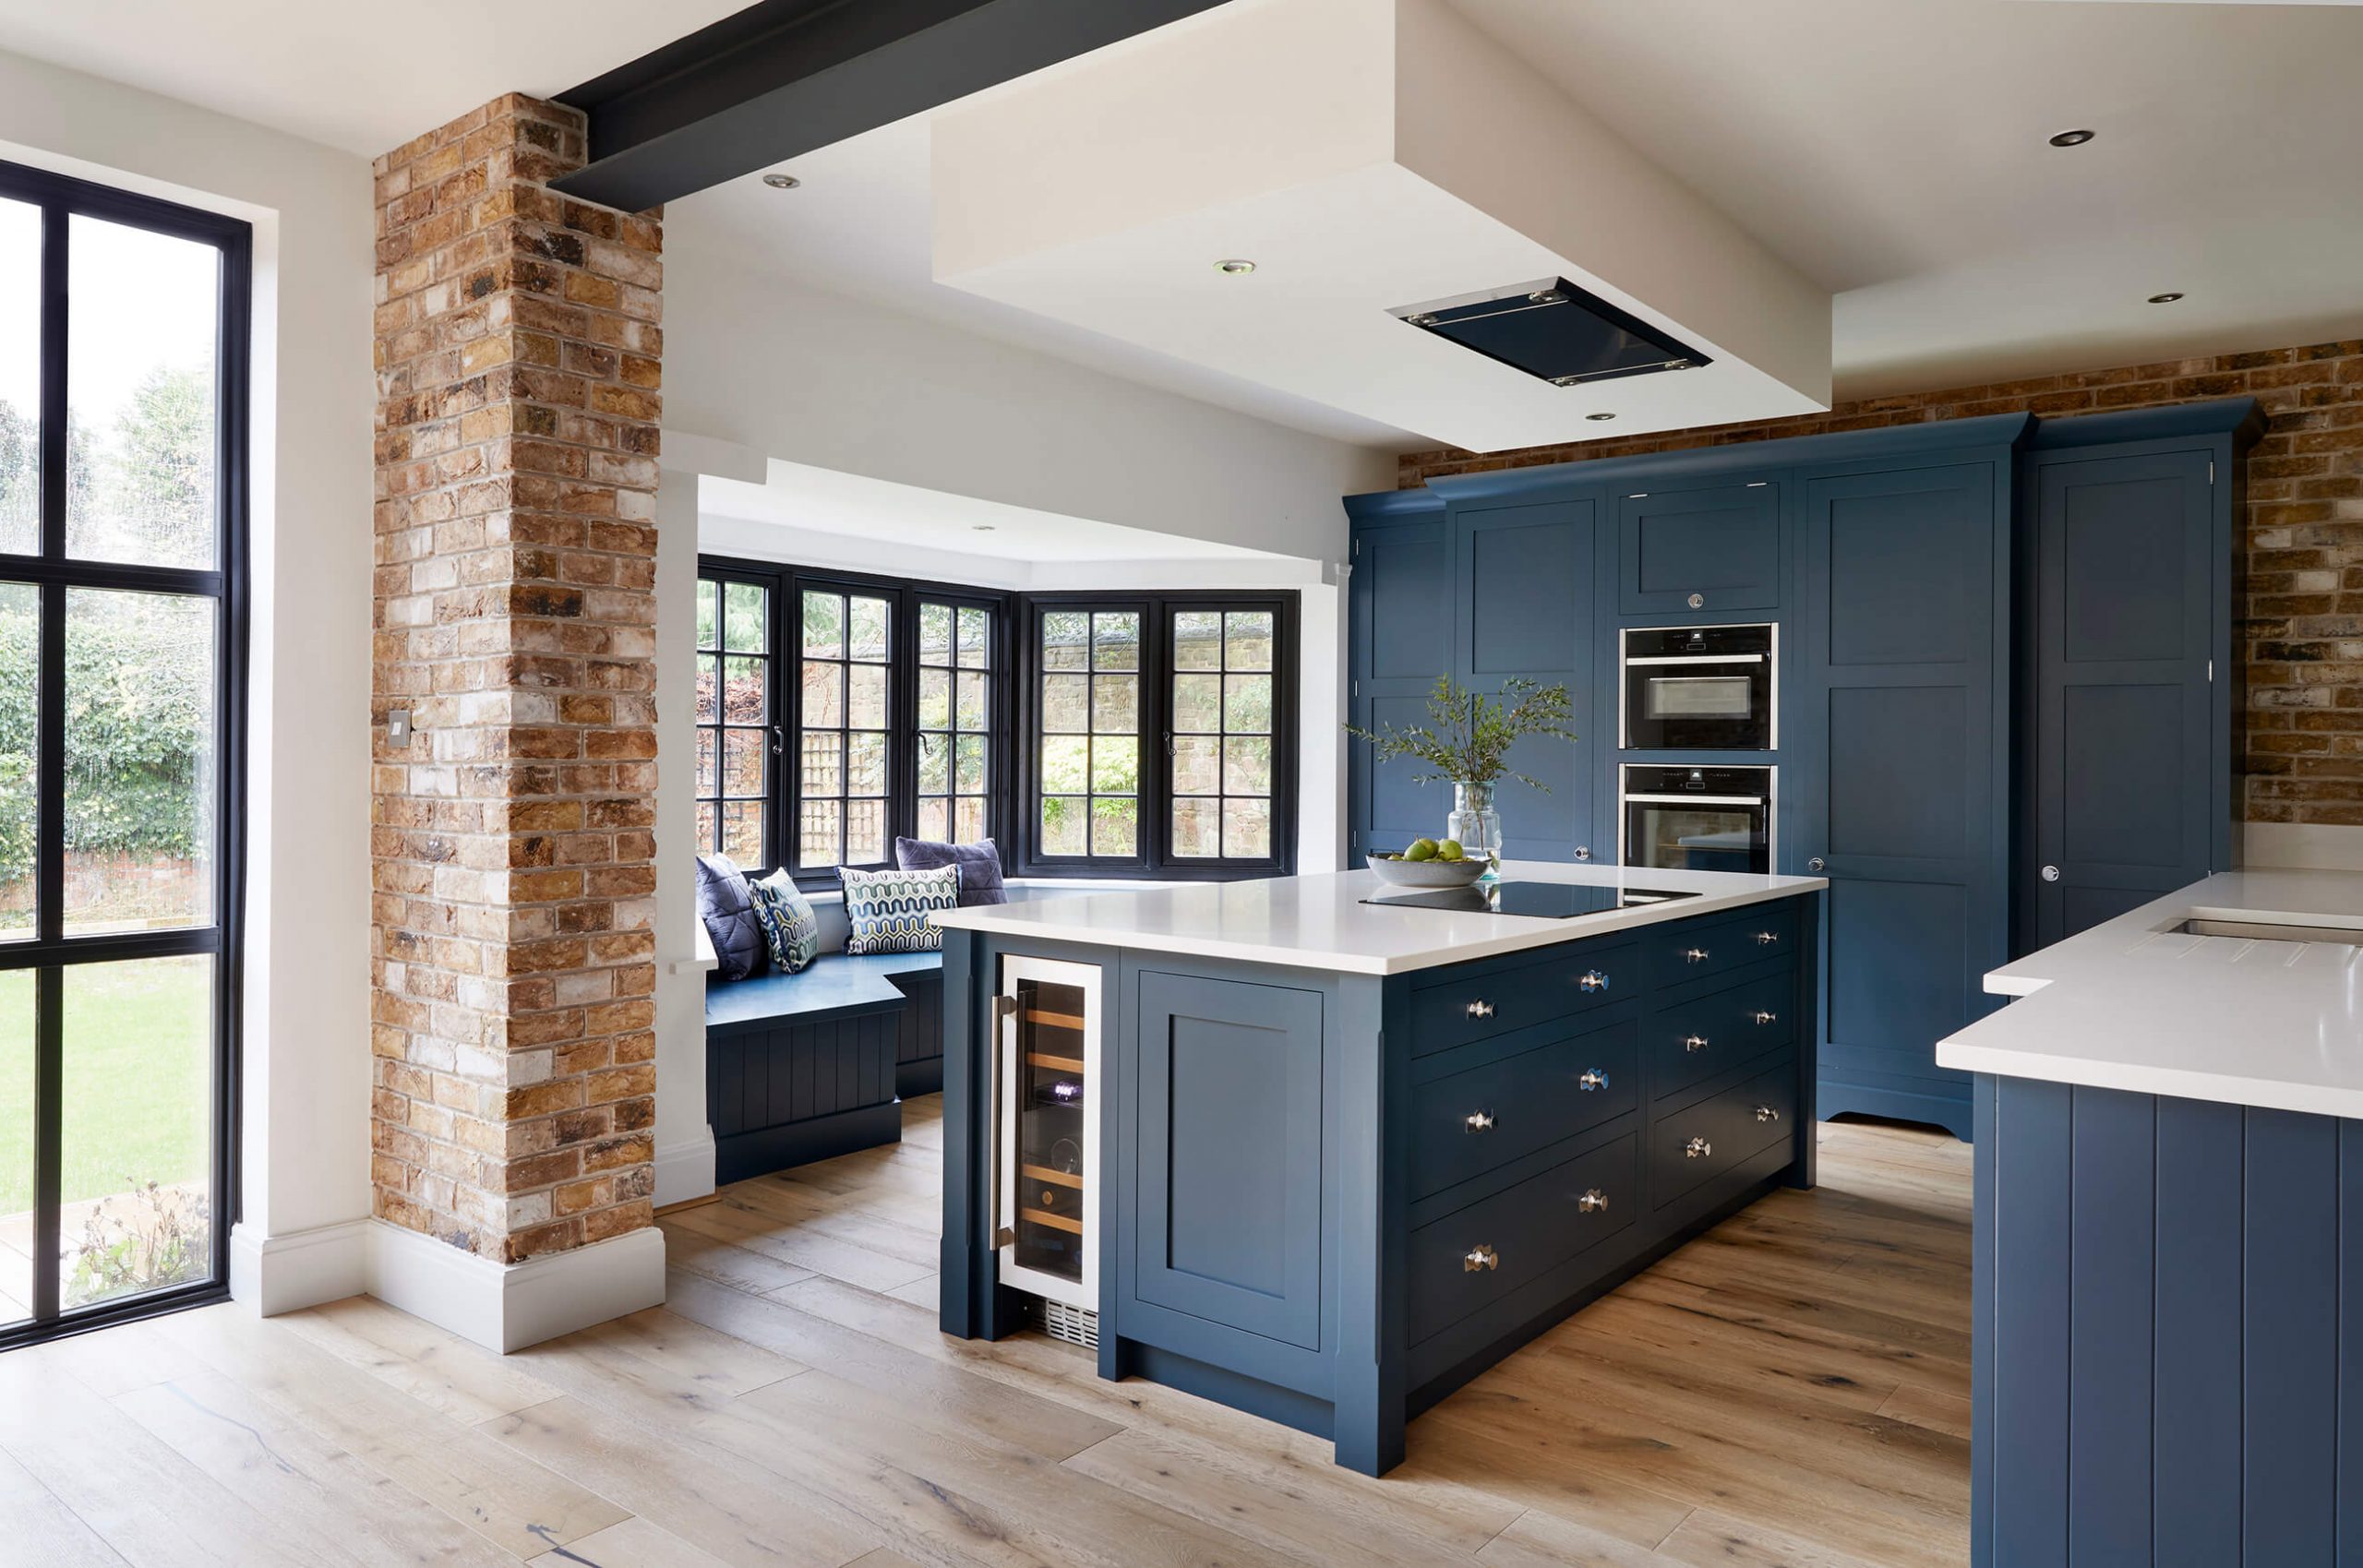 A Refreshingly Modern Take on a Classic Blue Kitchen Design